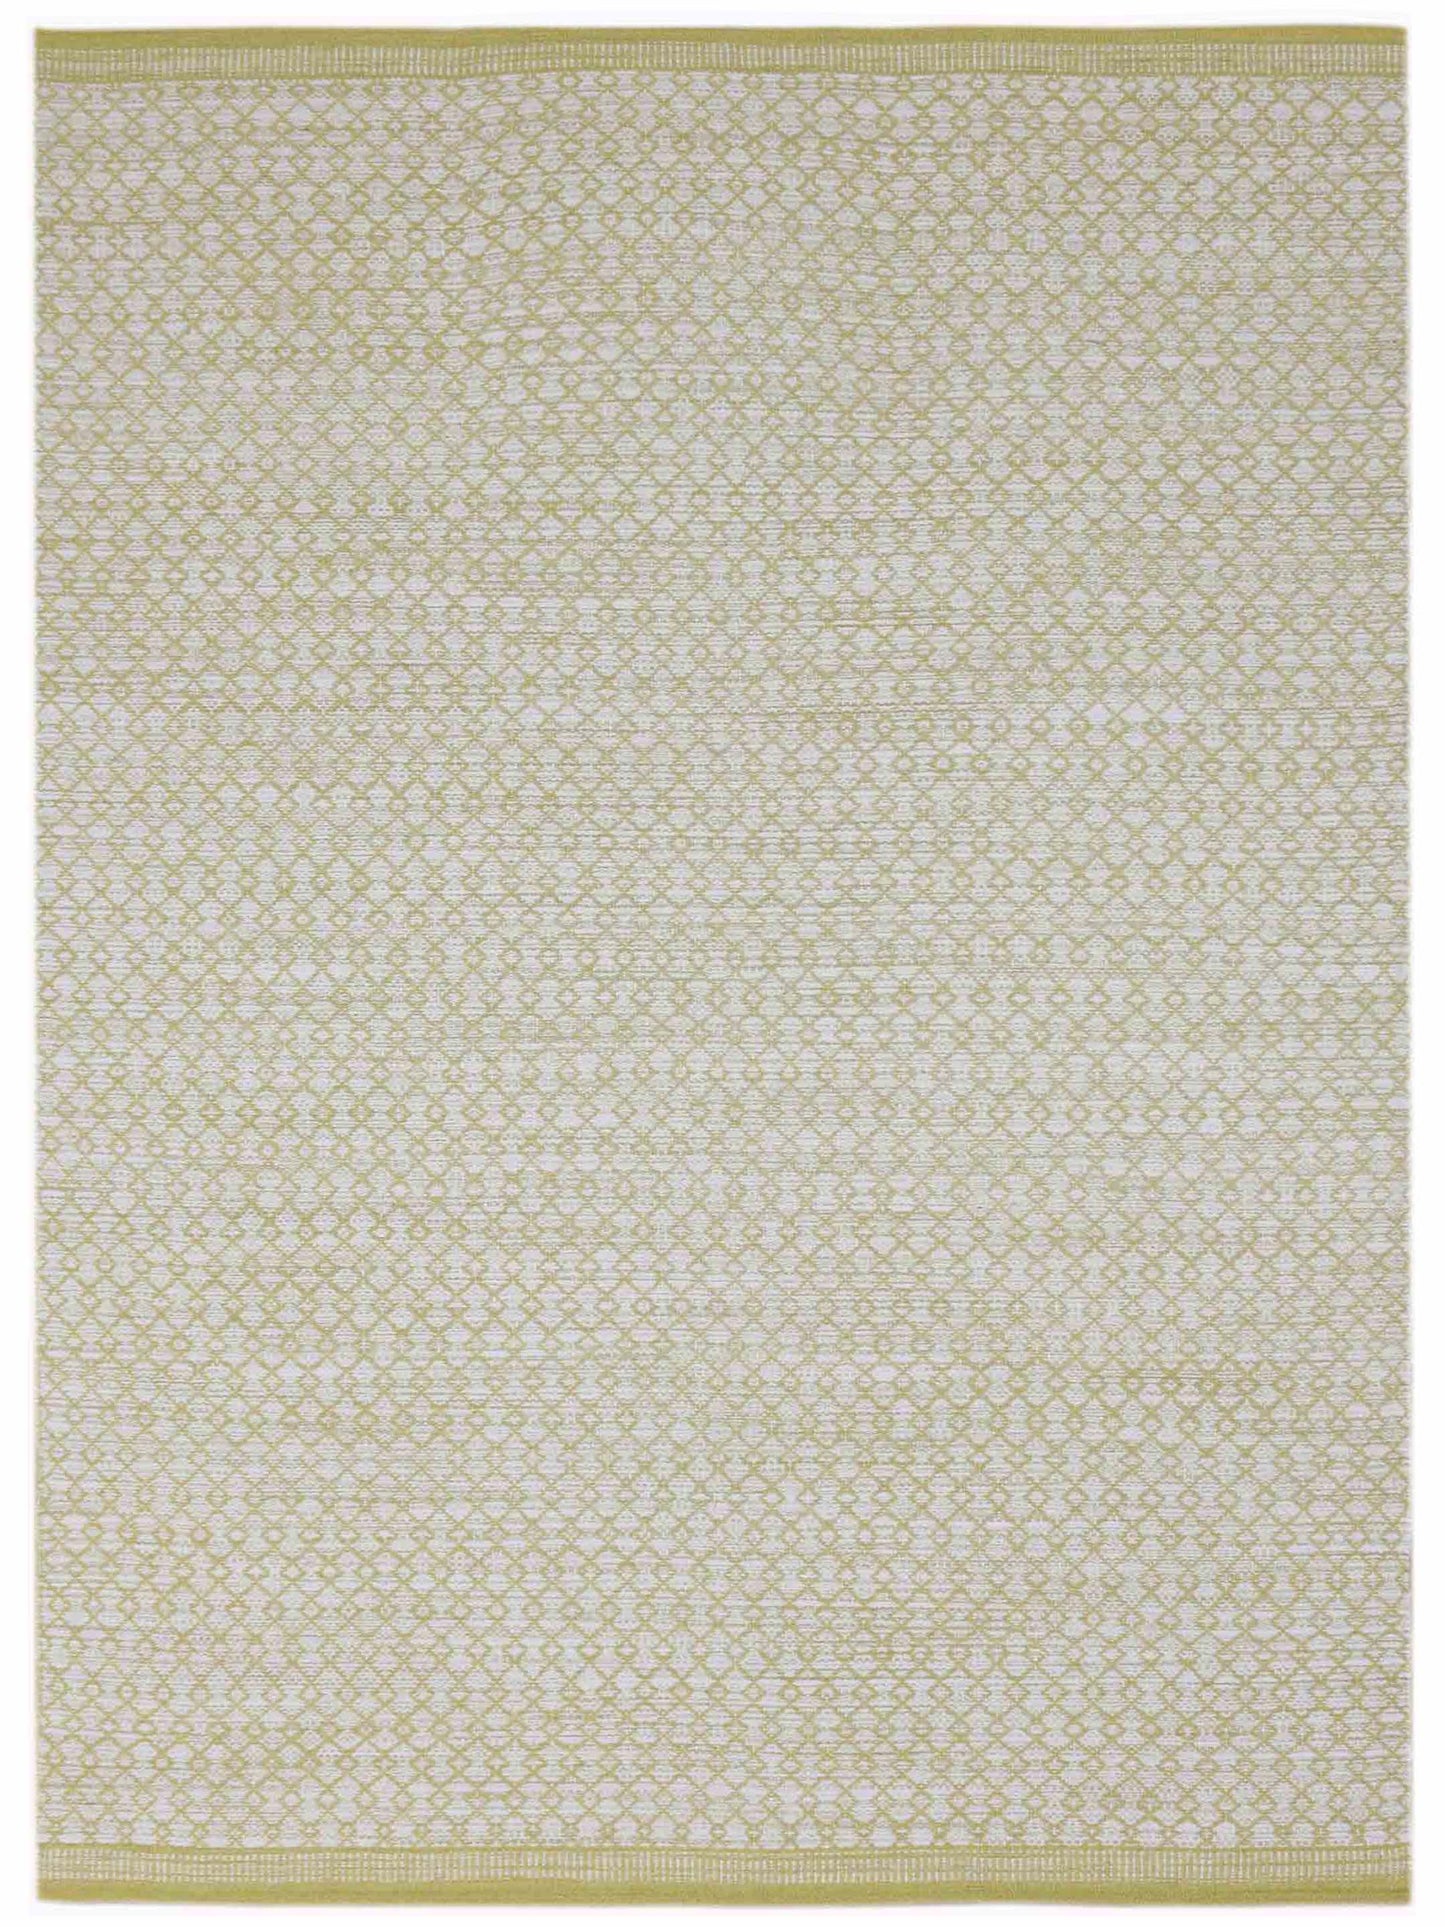 Limited Classic CL-103 Yellow Transitional Woven Rug